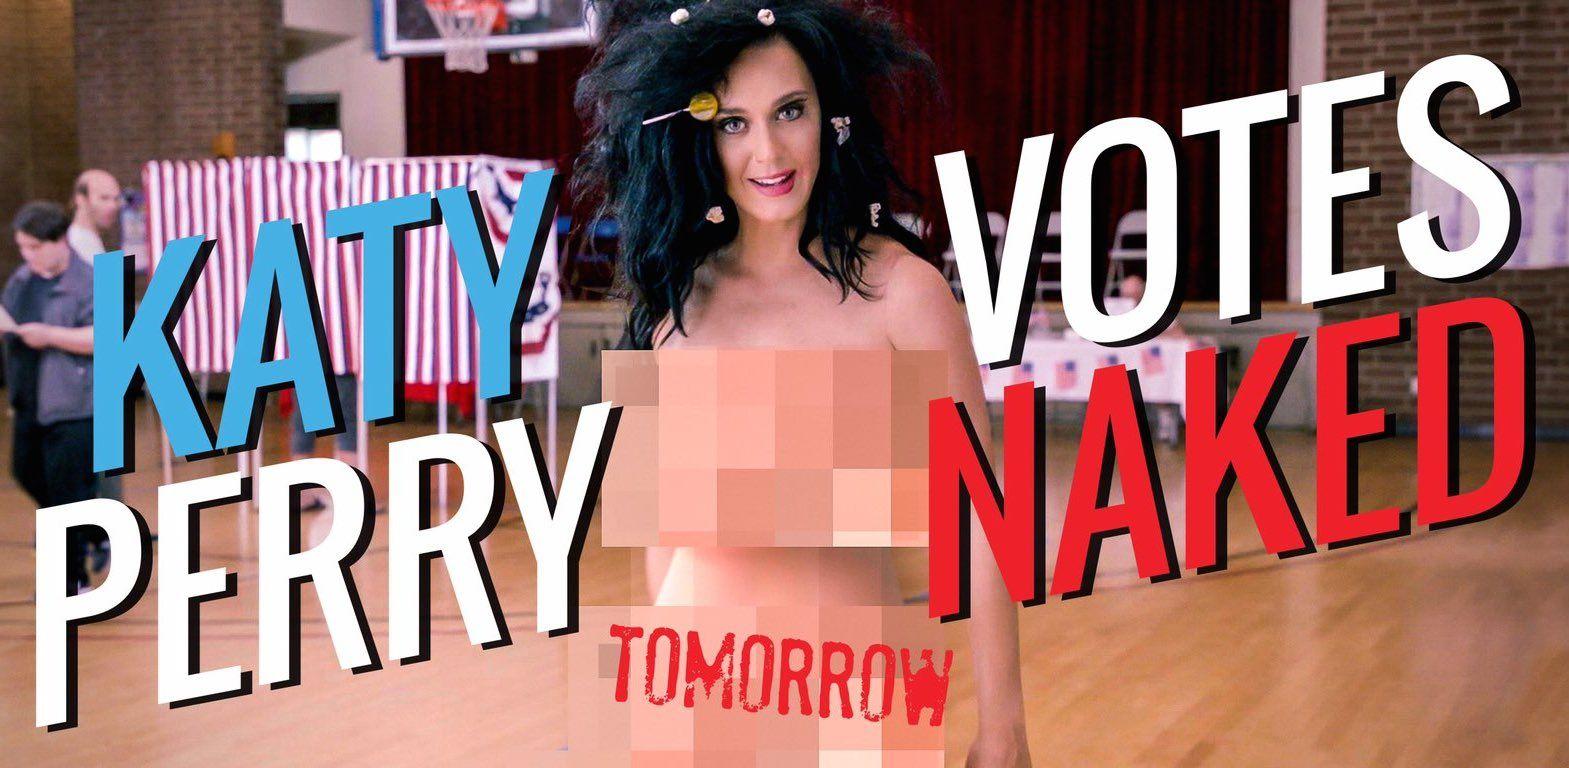 best of Perry video Katy naked